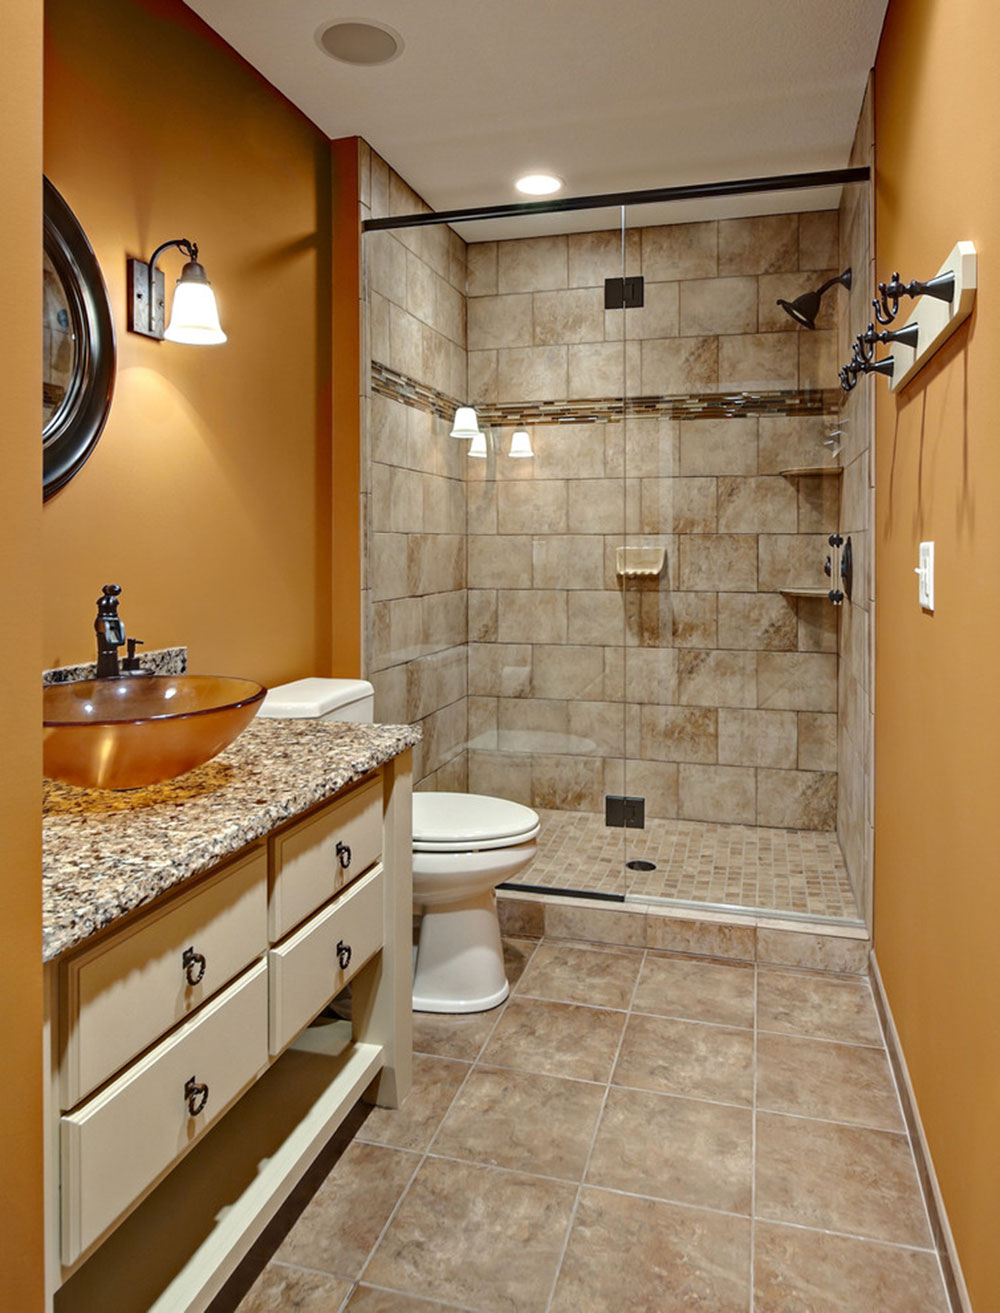 Cost To Add A Bathroom In The Basement, How Much Does It Cost To Build A Small Bathroom In The Basement